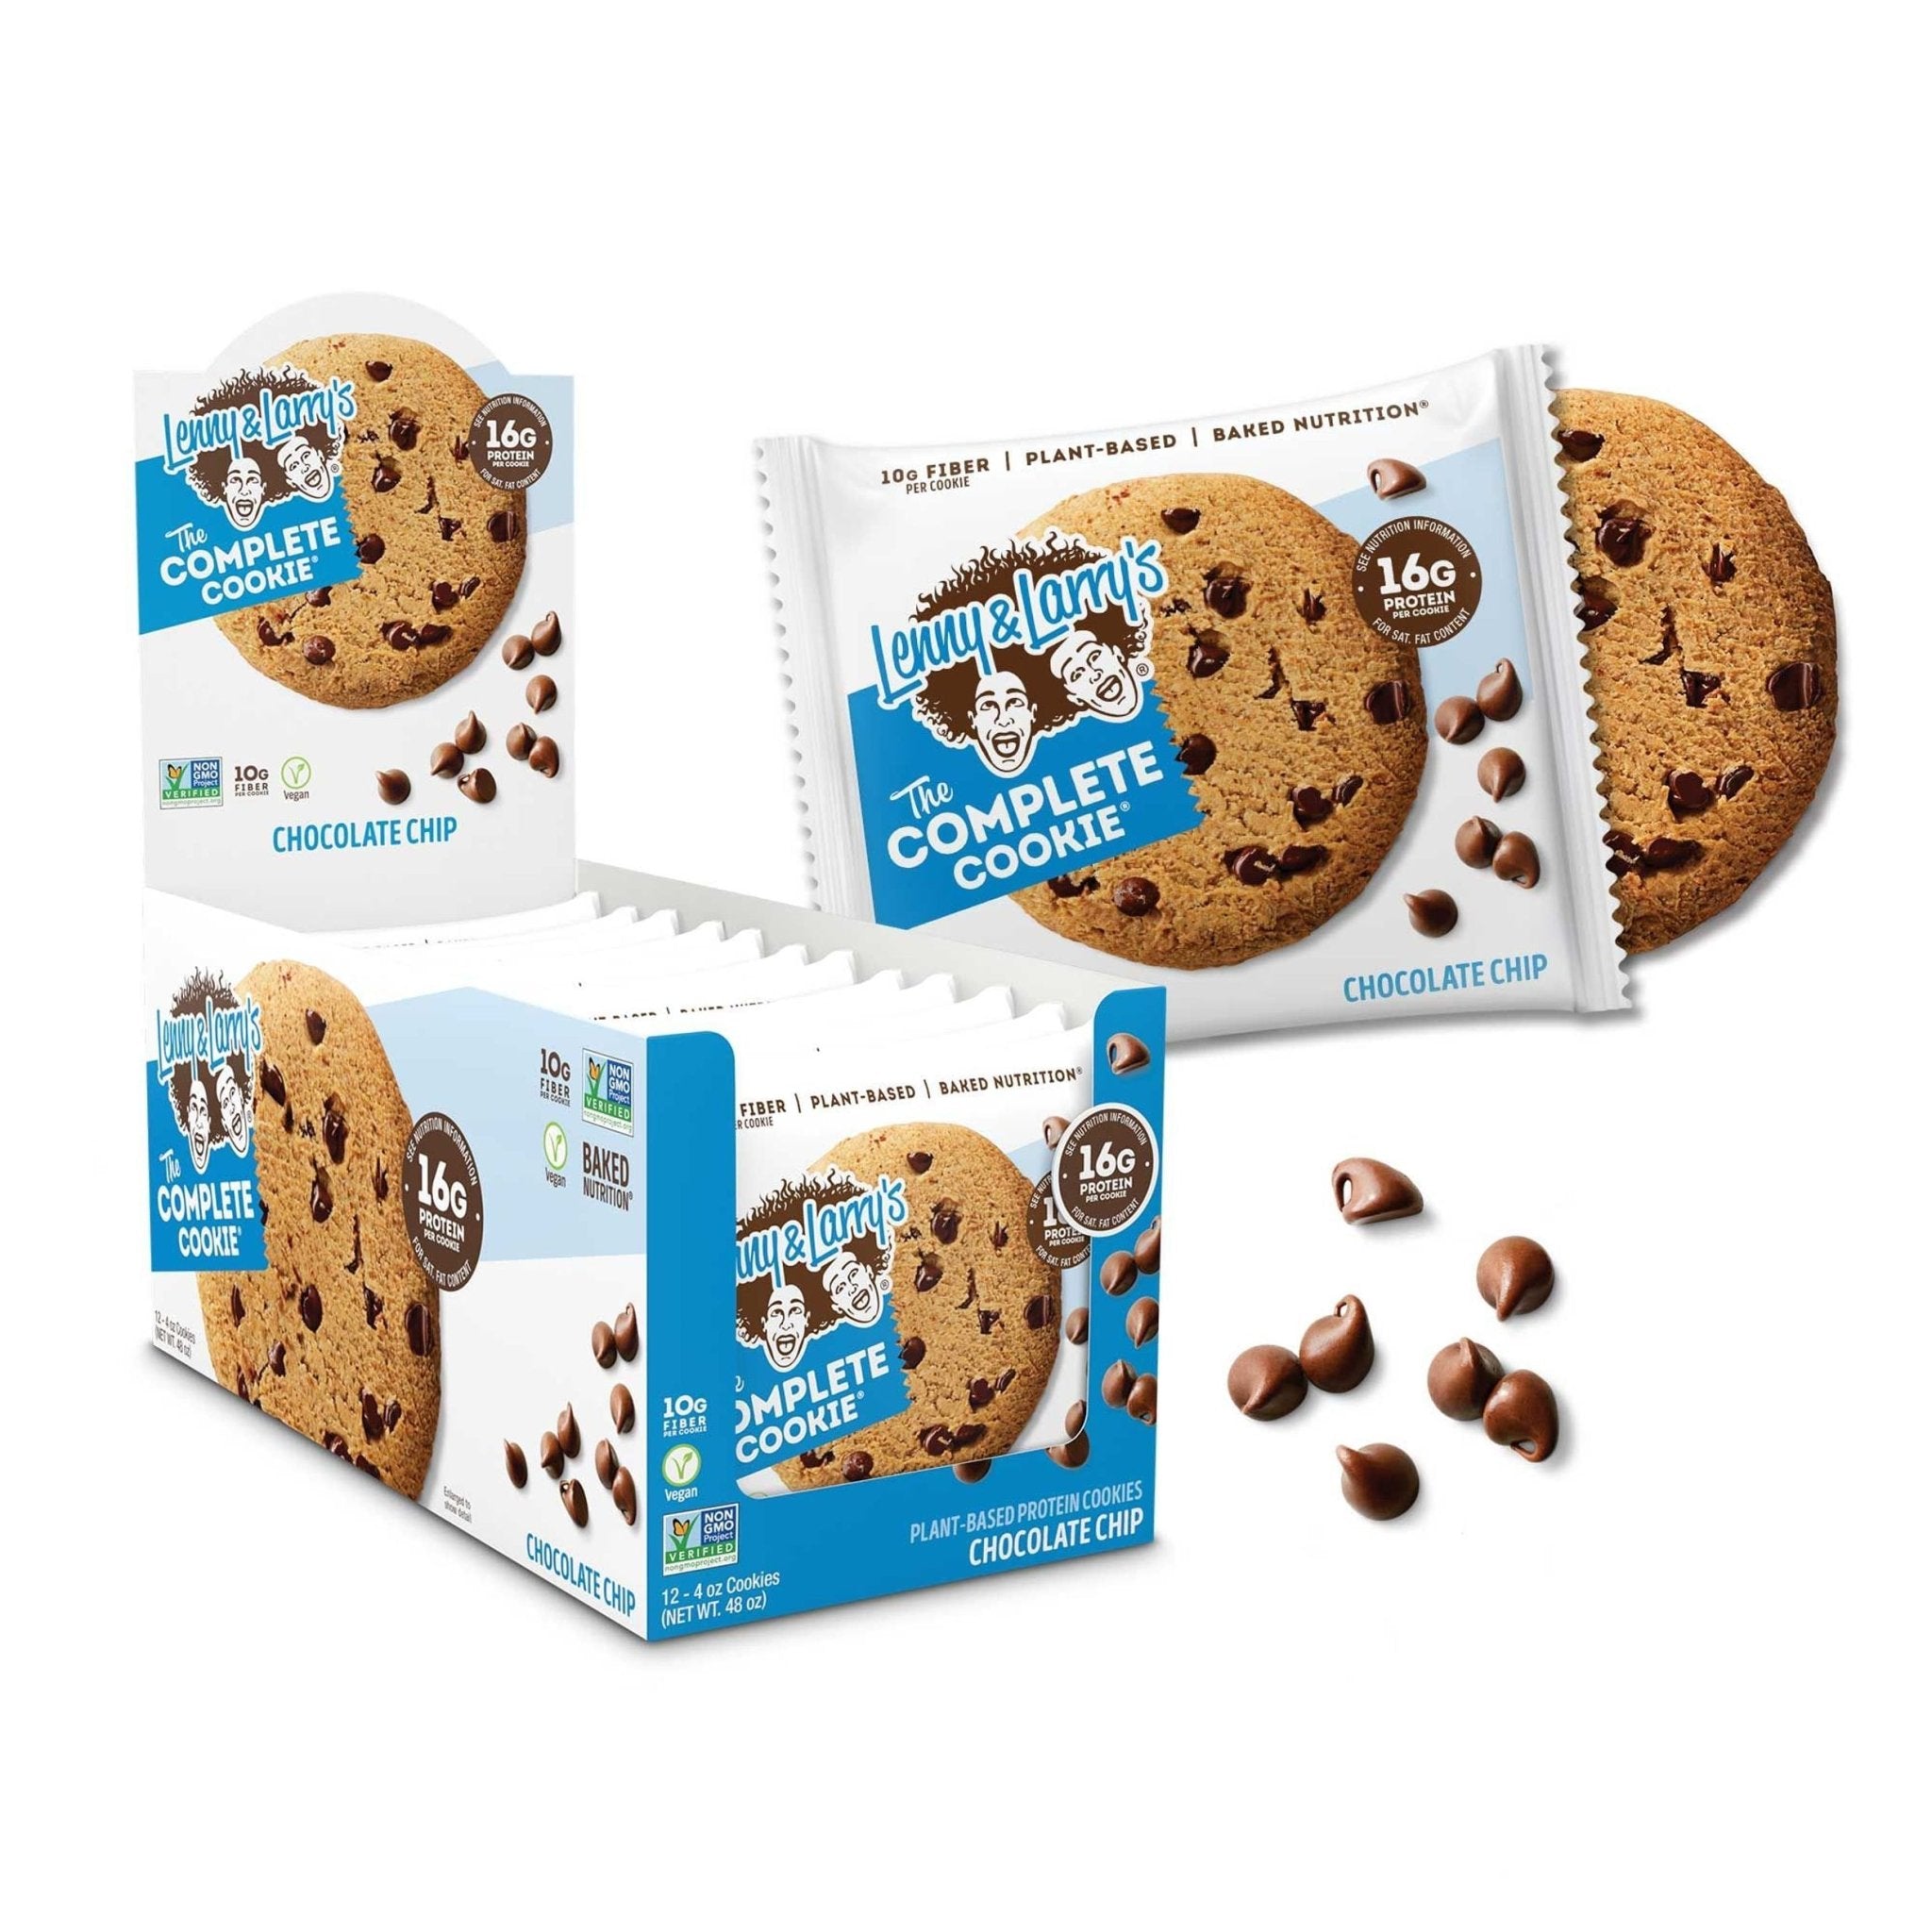 Lenny & Larry Complete Cookie (Box of 12) The Complete Cookie® - Hypa Christchurch - Lenny and Larry